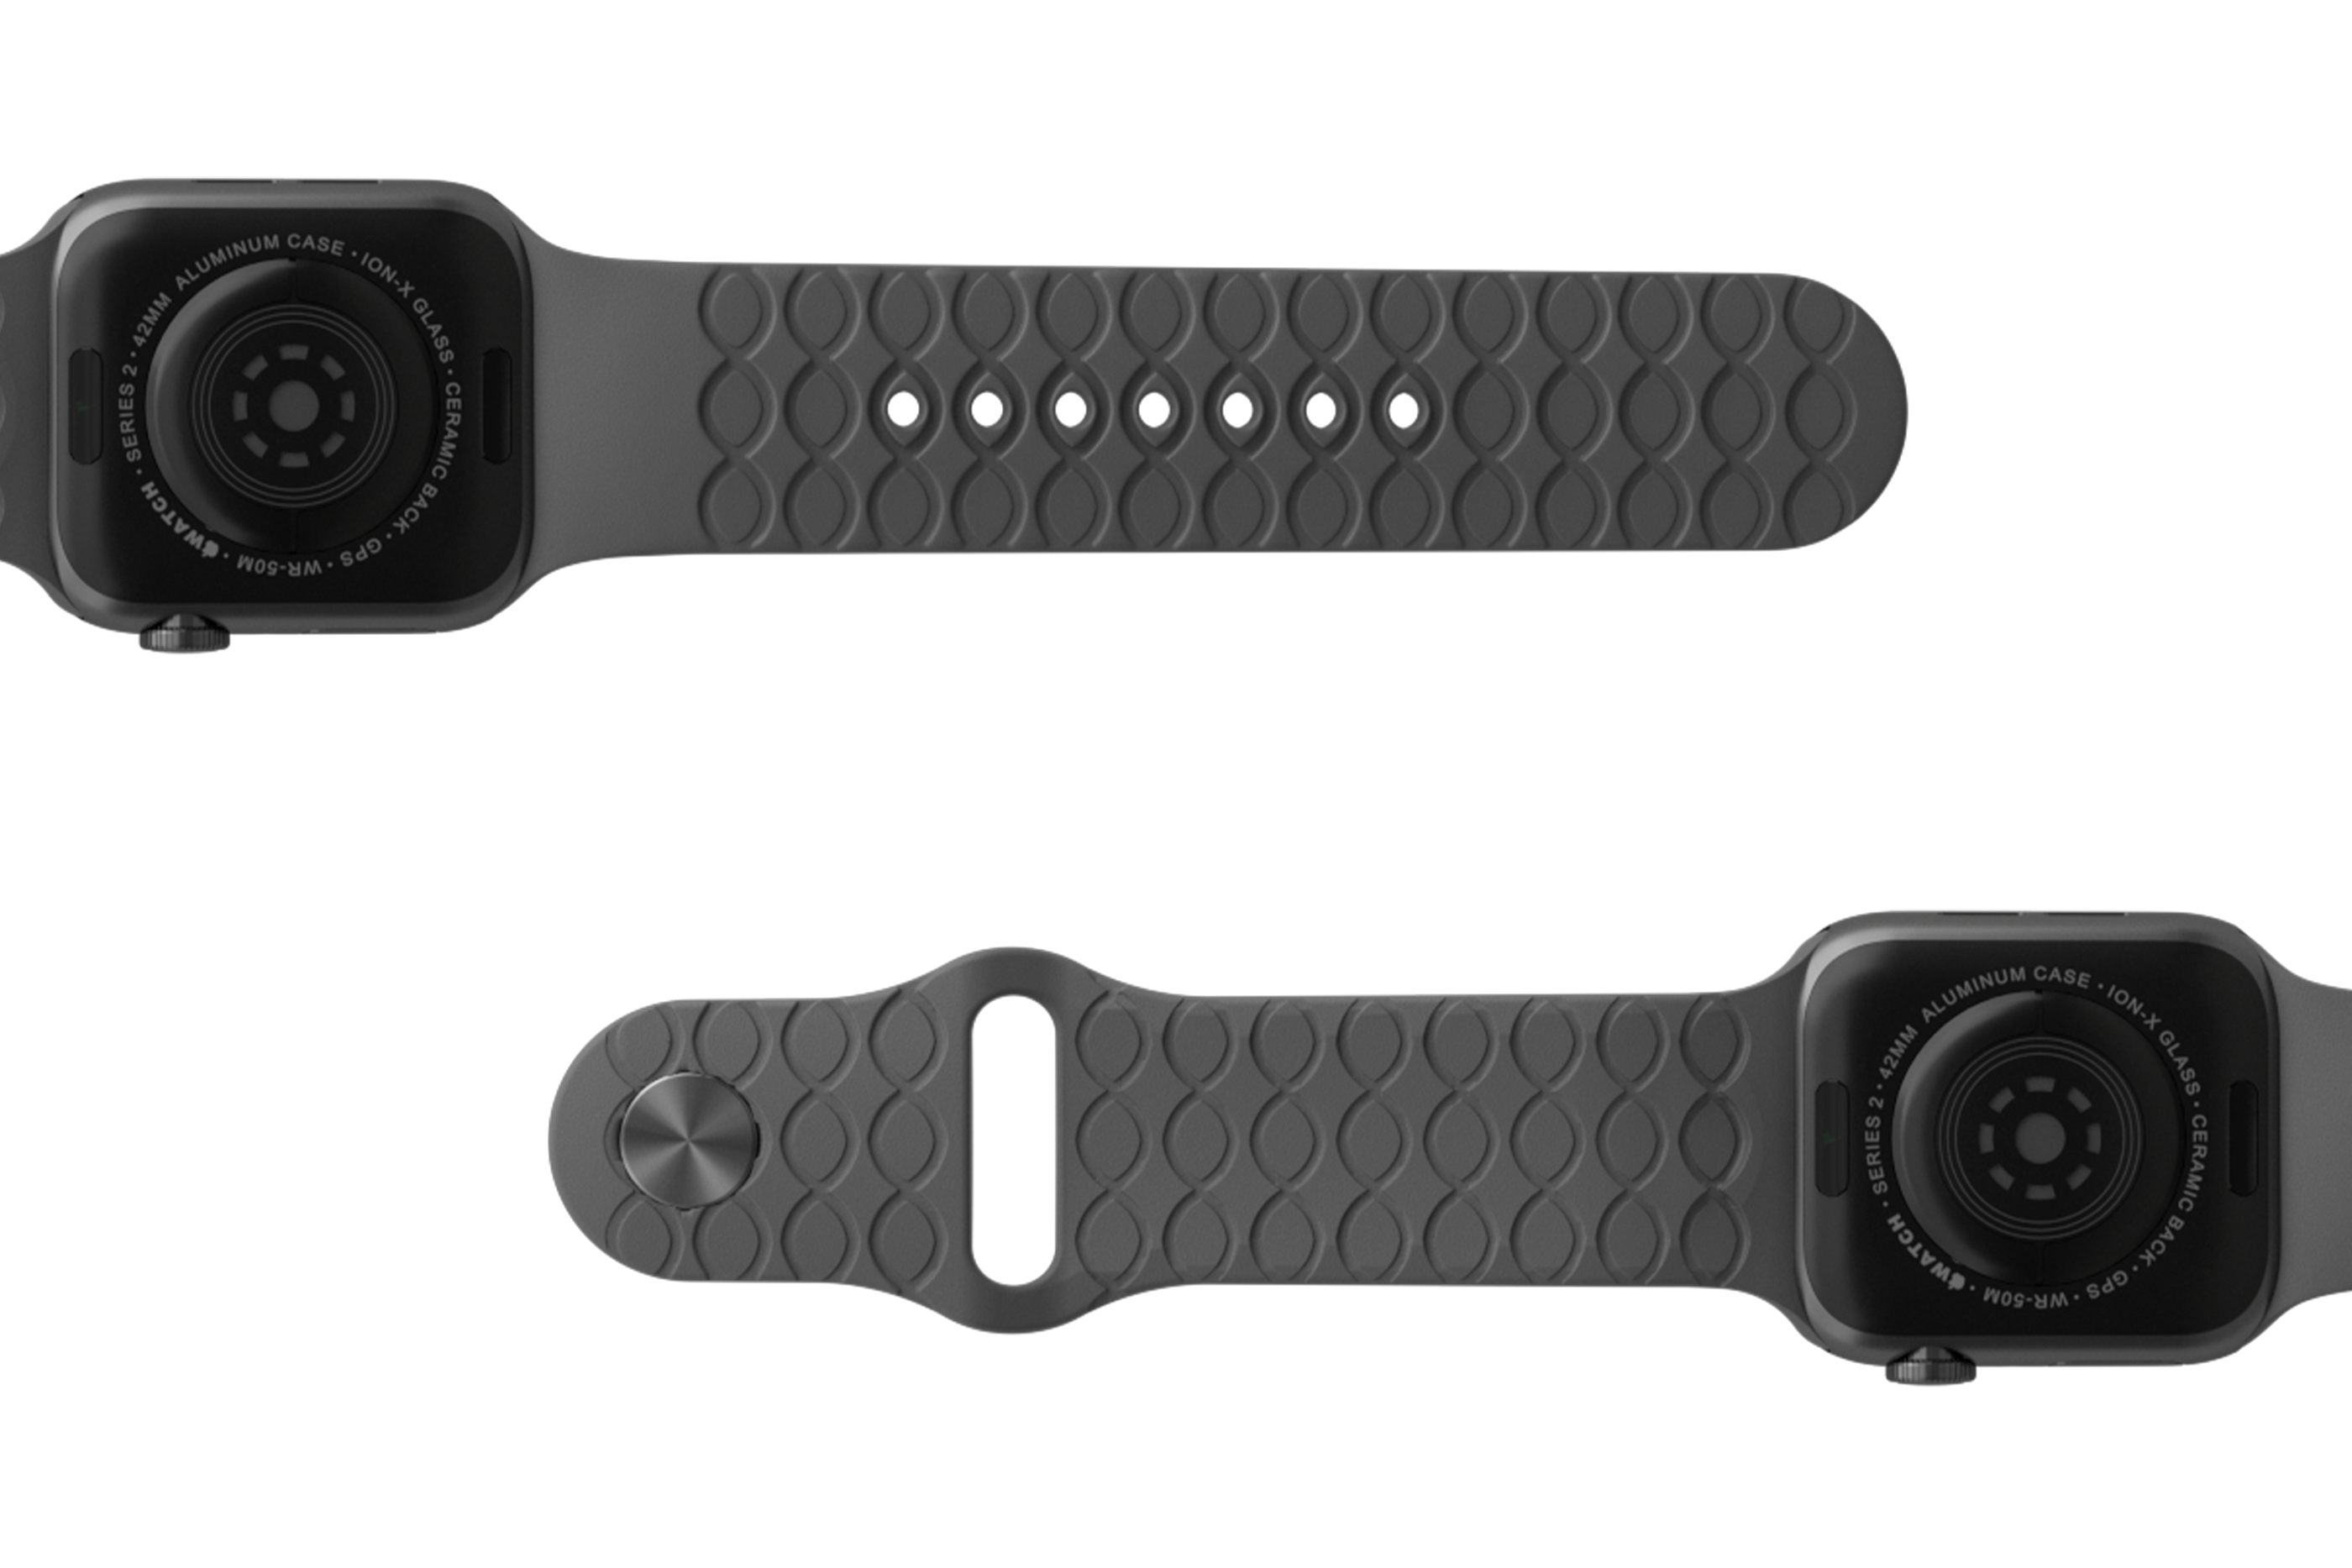 Solid Deep Stone Grey Apple watch band with gray hardware viewed bottom up